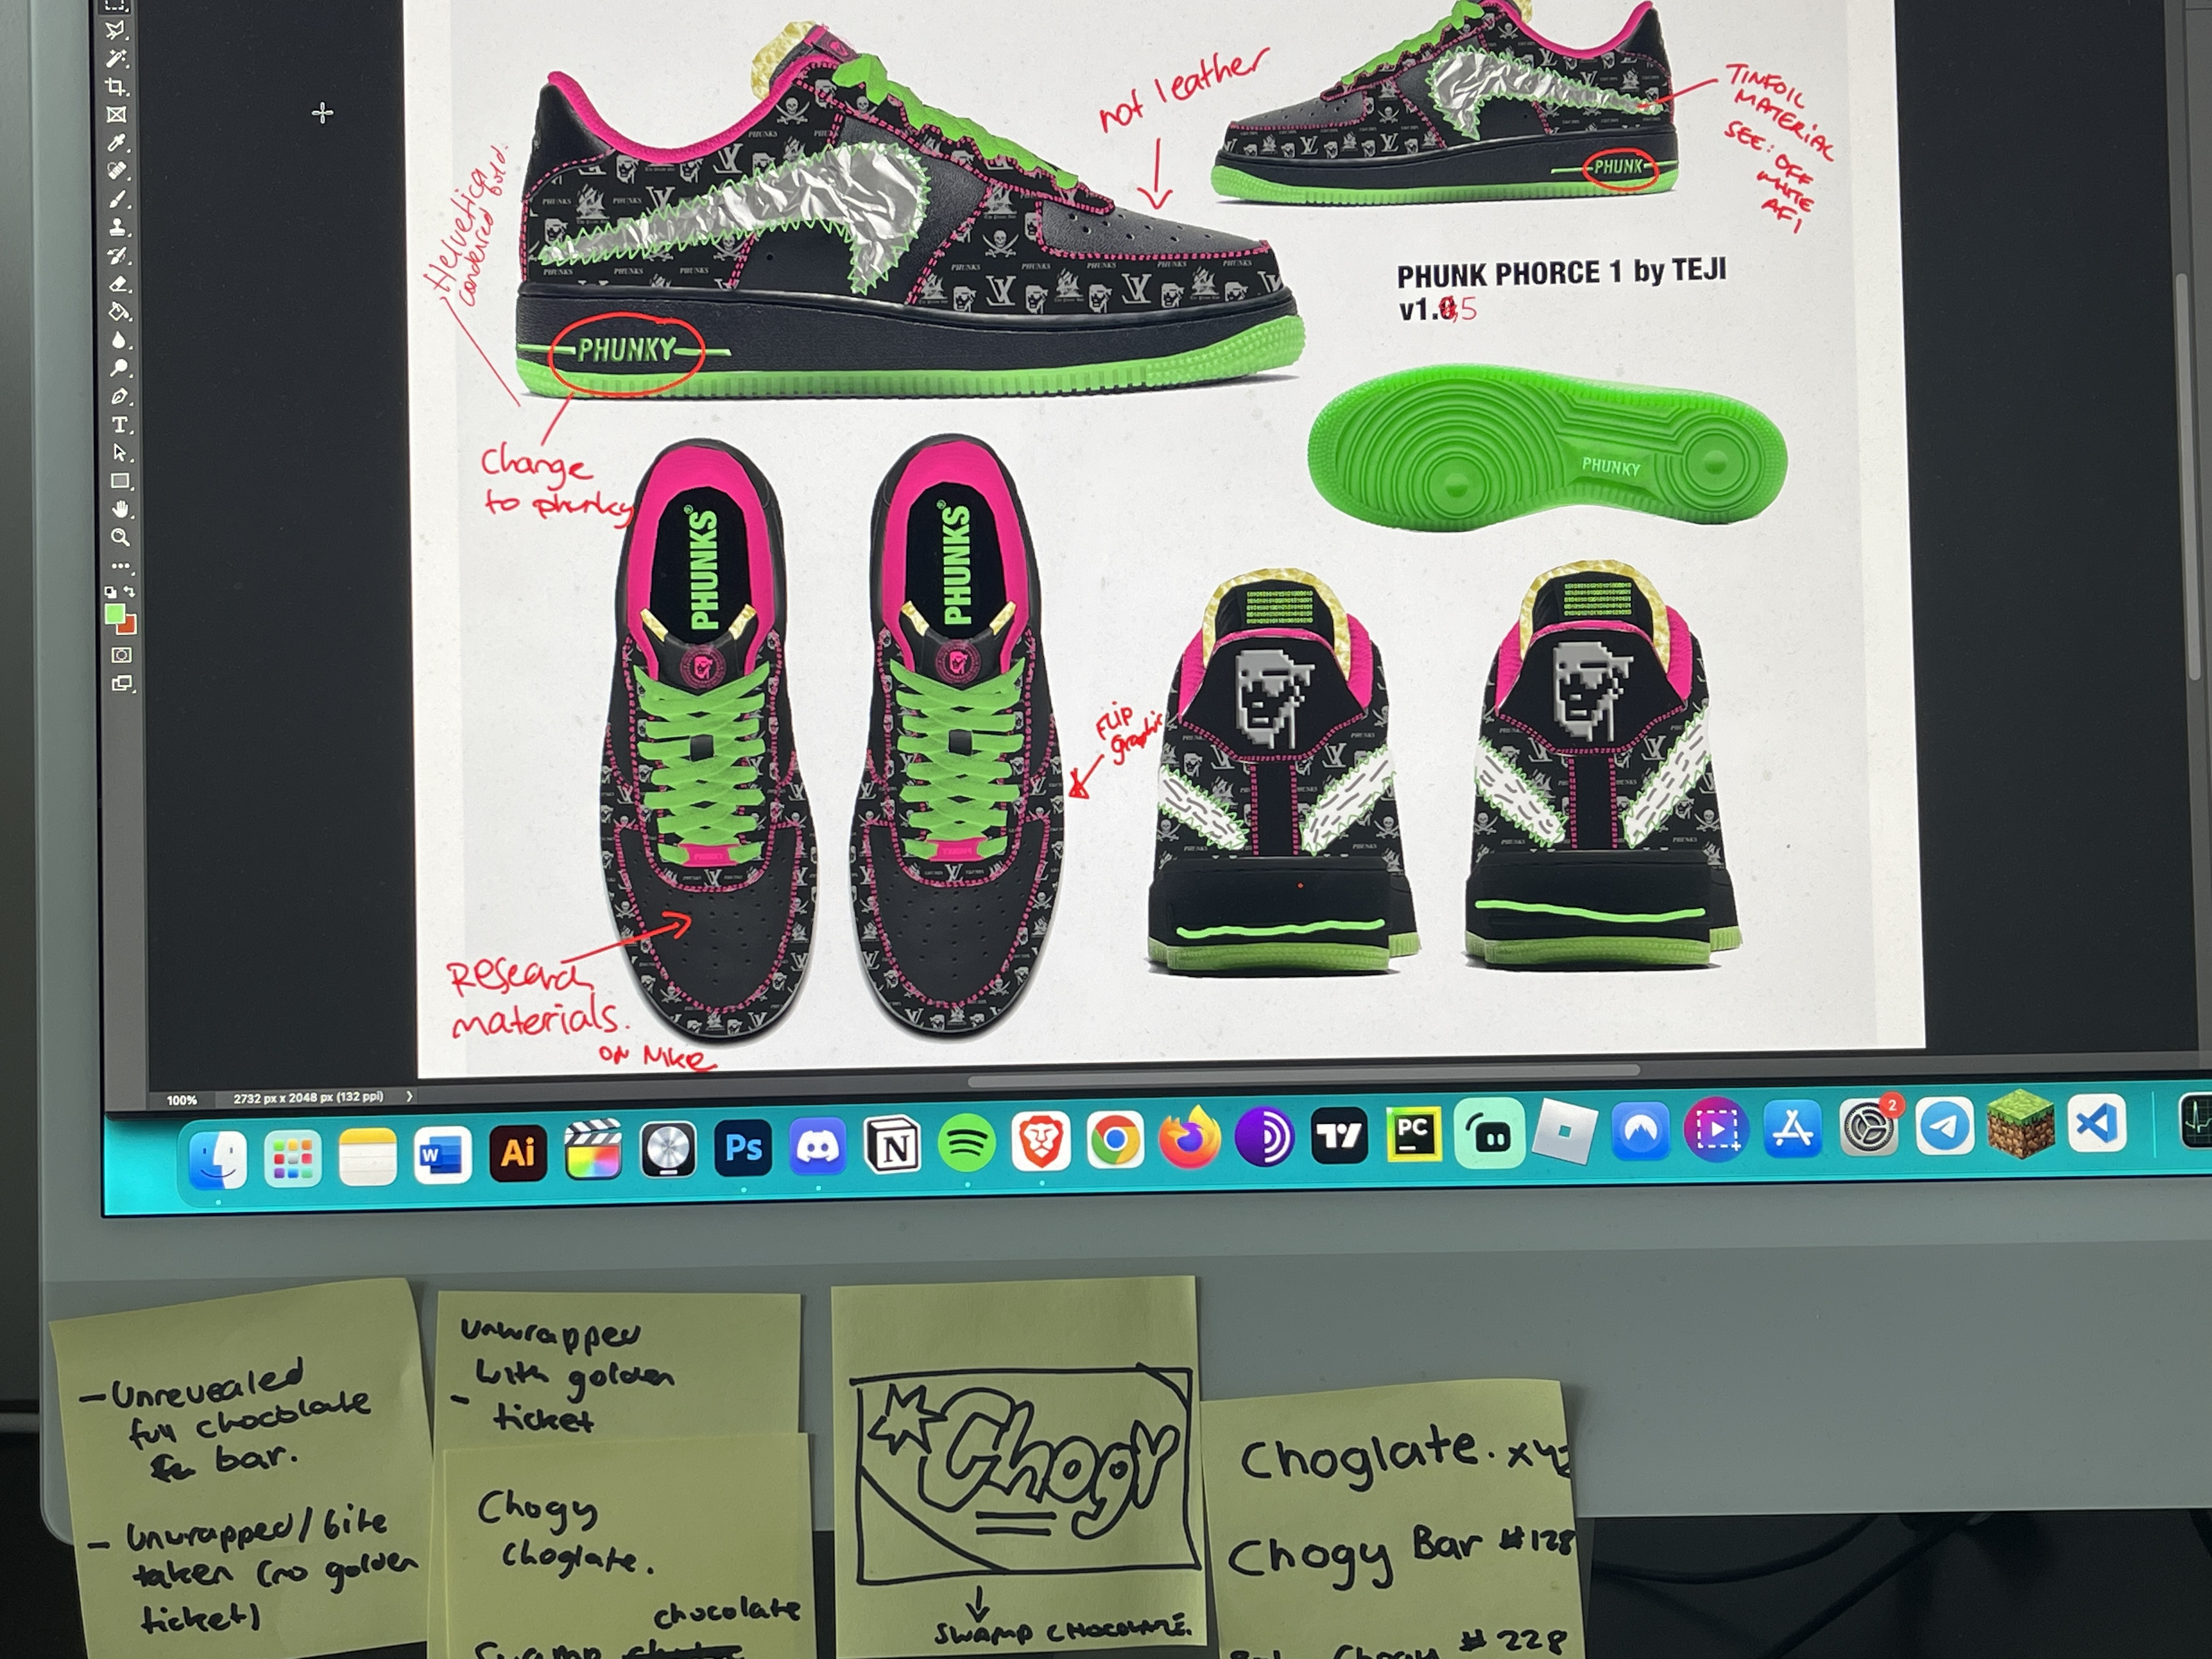 Some early computer renderings of the shoe project, courtesy TEJI